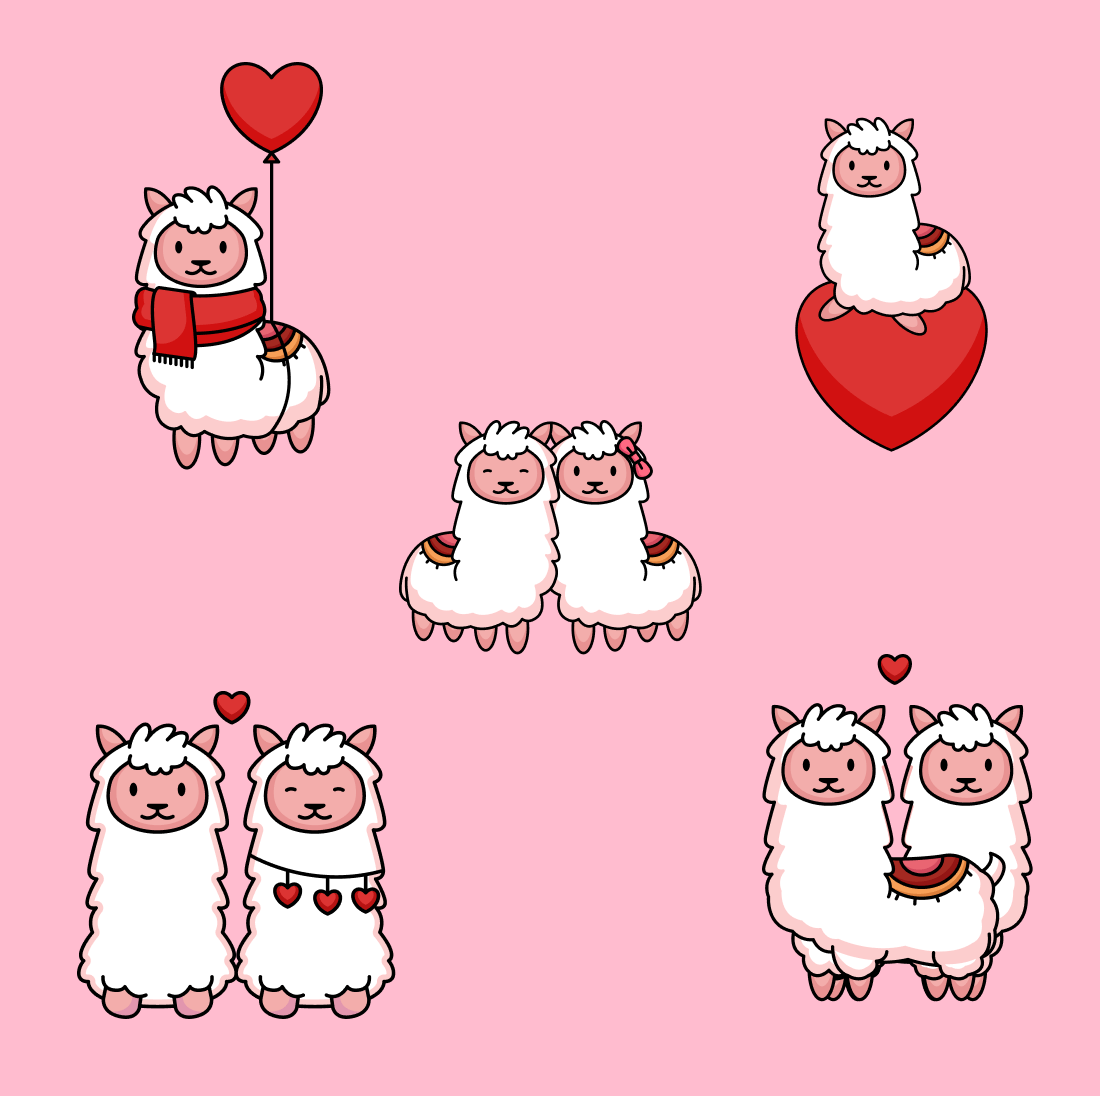 Group of llamas with a heart on a pink background.